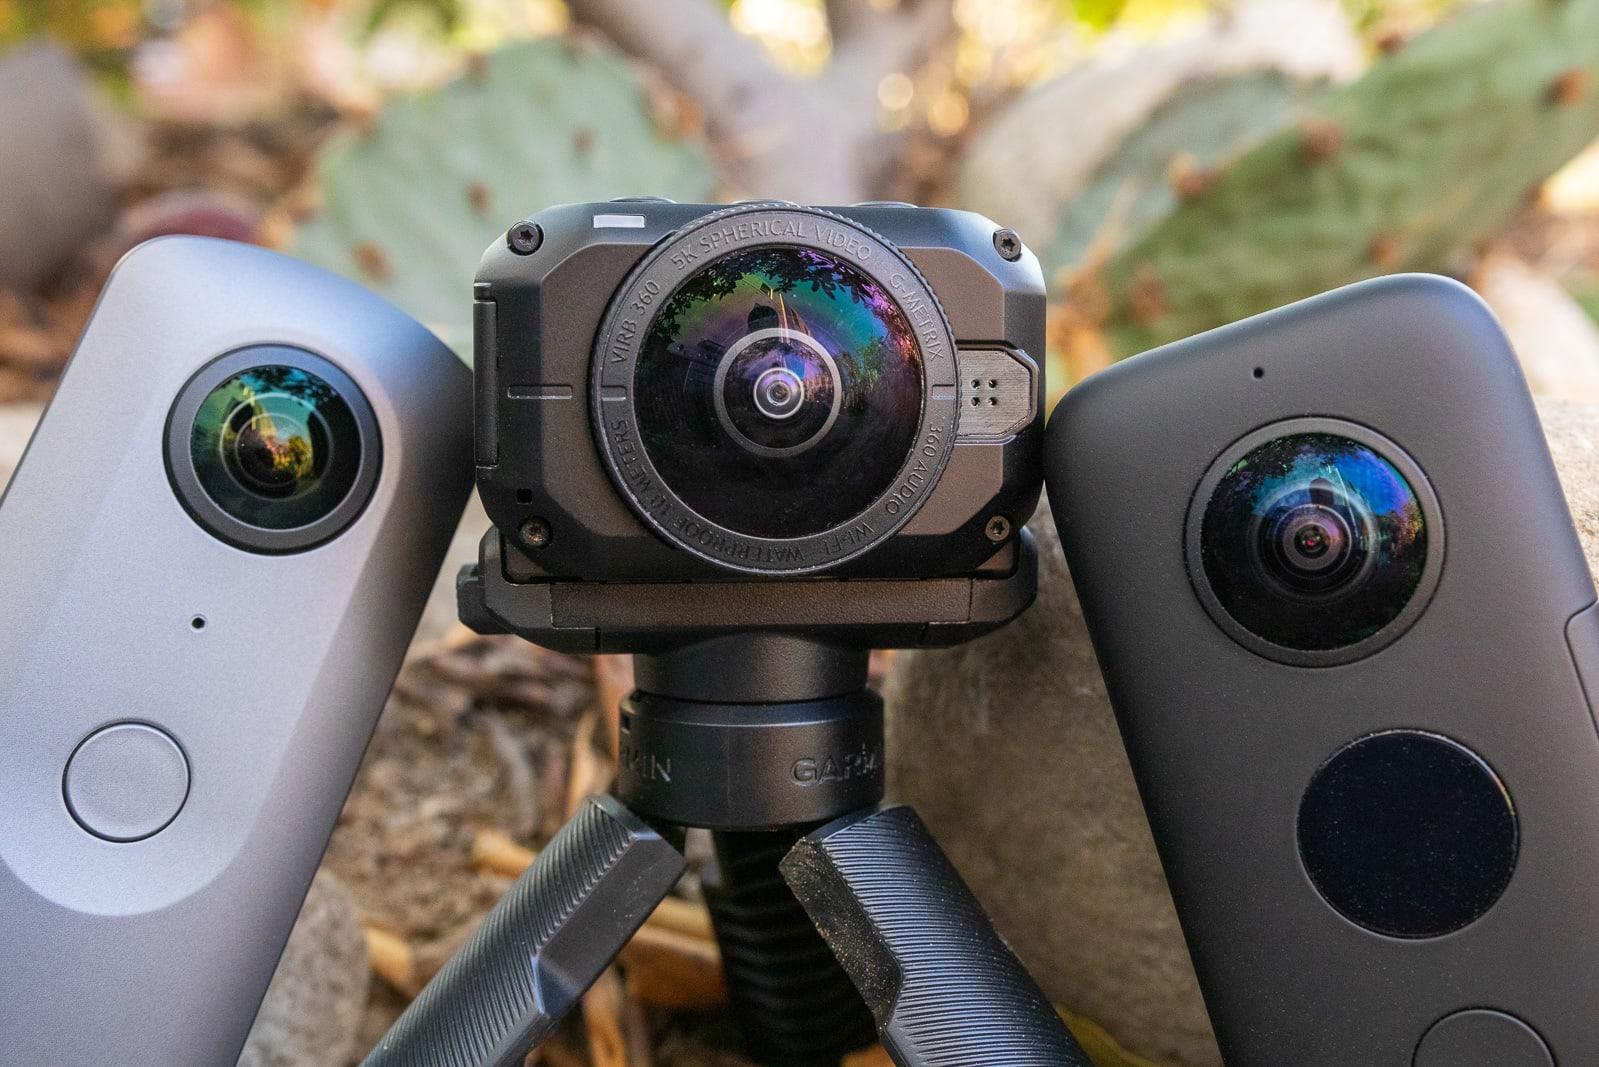 The Best Way to Use a 360 Camera